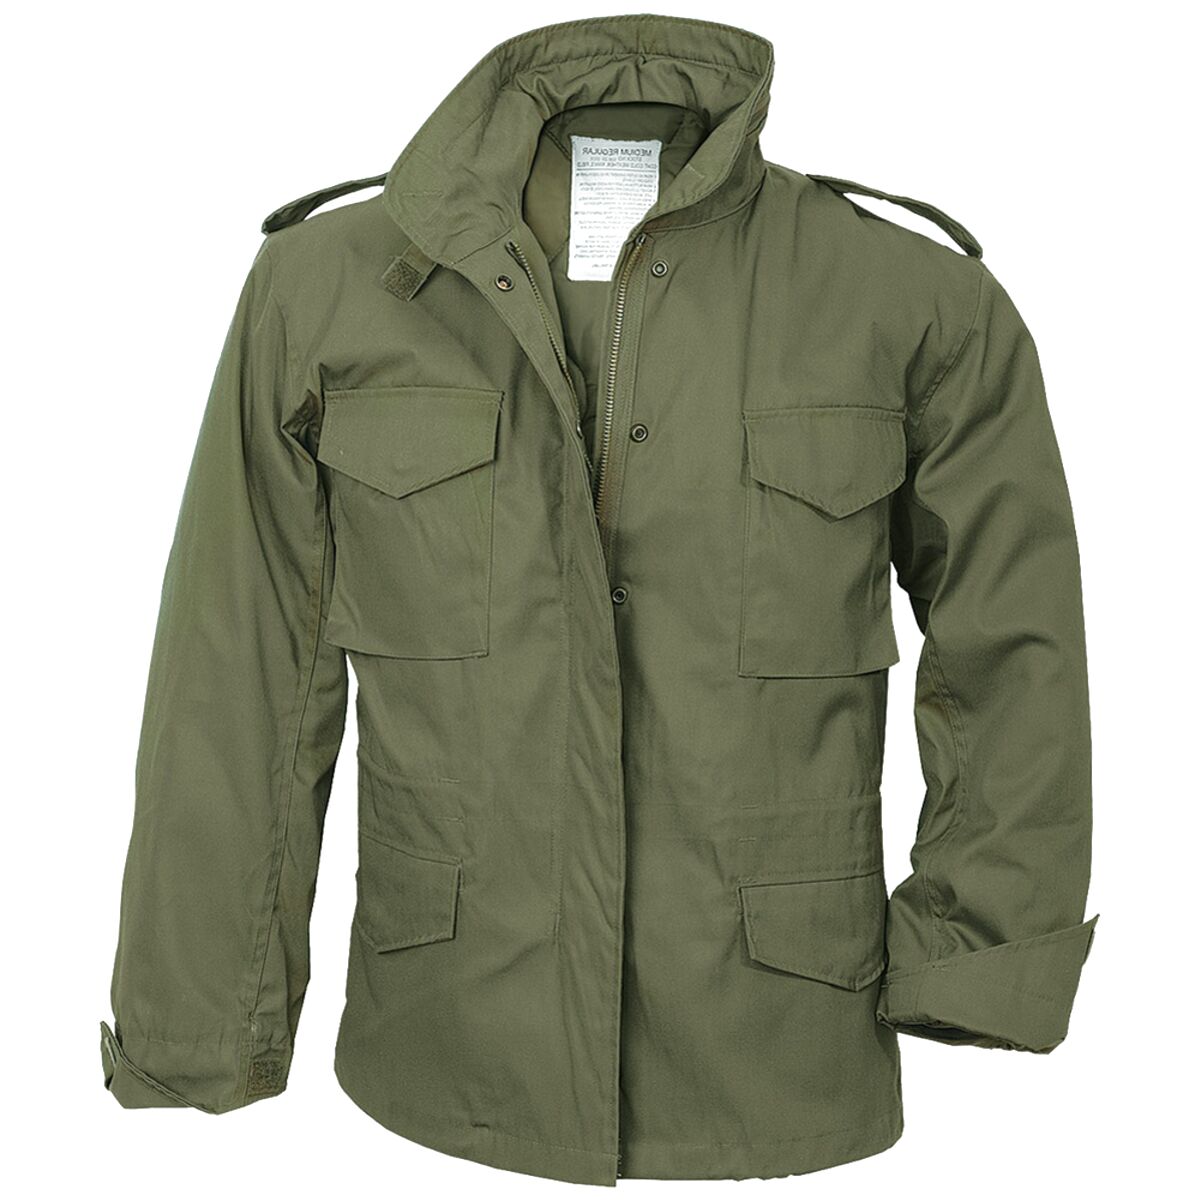 Army Surplus Coats for sale in UK | 60 used Army Surplus Coats